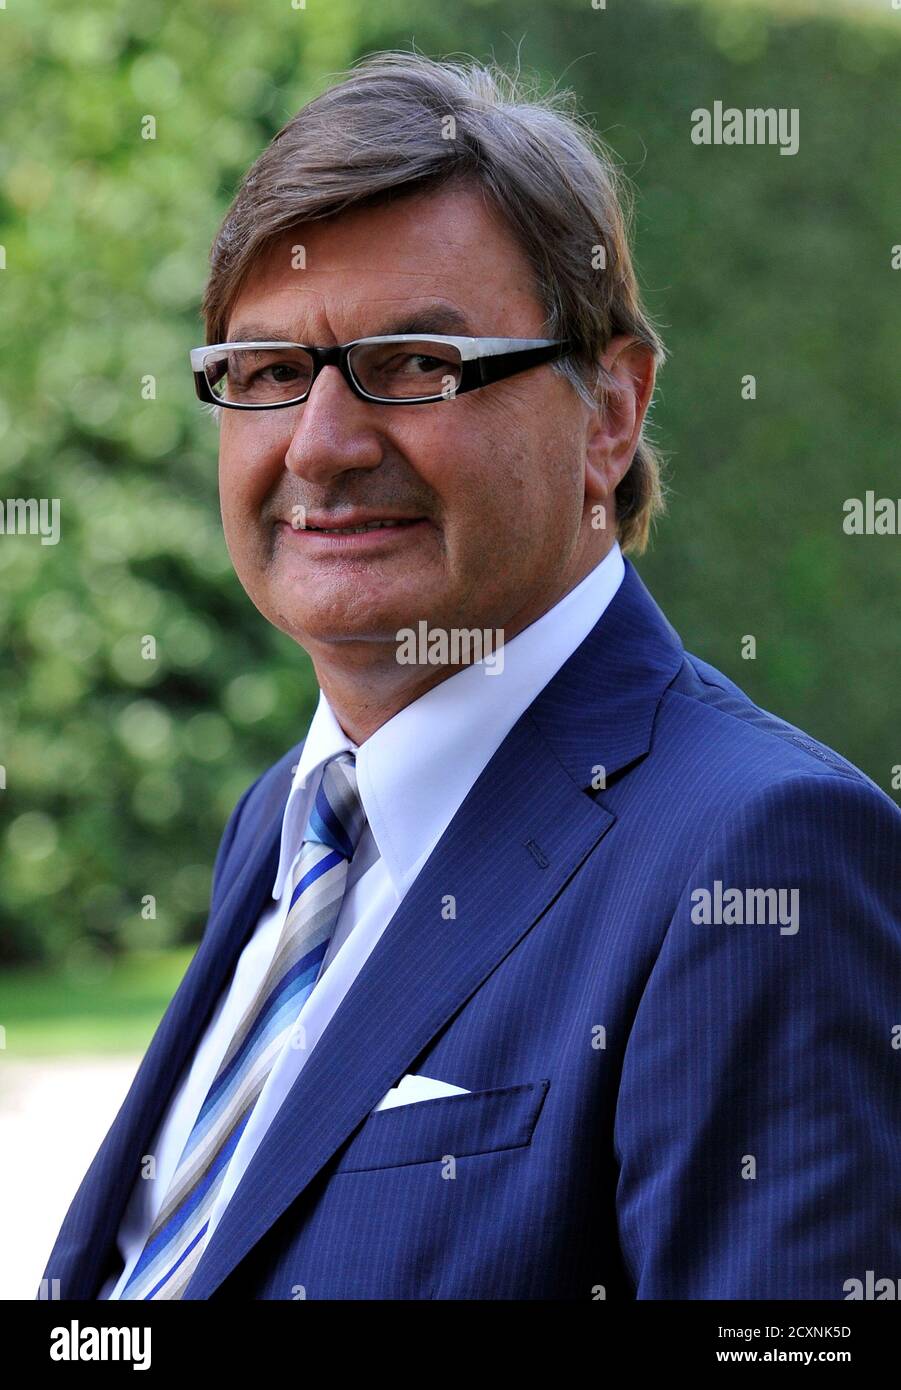 Geox President Mario Moretti Polegato is pictured during the Ambrosetti  workshop, an economic conference, in Cernobbio, next to Como, September 8,  2012. REUTERS/Paolo Bona (ITALY - Tags: BUSINESS POLITICS Stock Photo -  Alamy